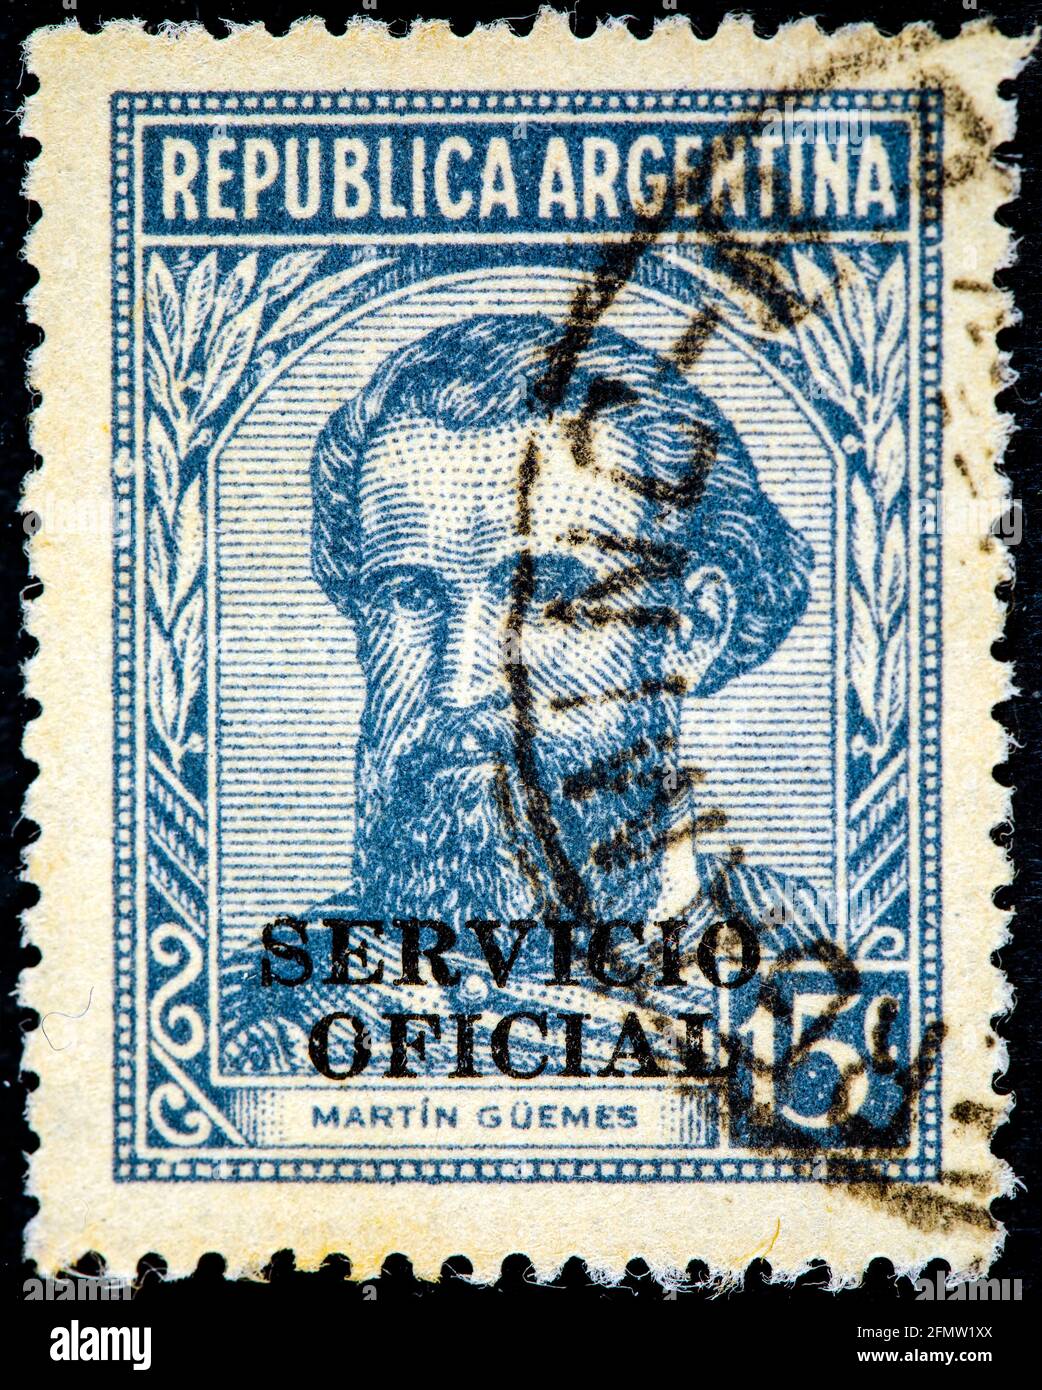 ARGENTINA - CIRCA 1935: A stamp printed in Argentina, shows portrait of Martin Miguel de Guemes (1785-1821) a military leader and popular caudillo, ci Stock Photo